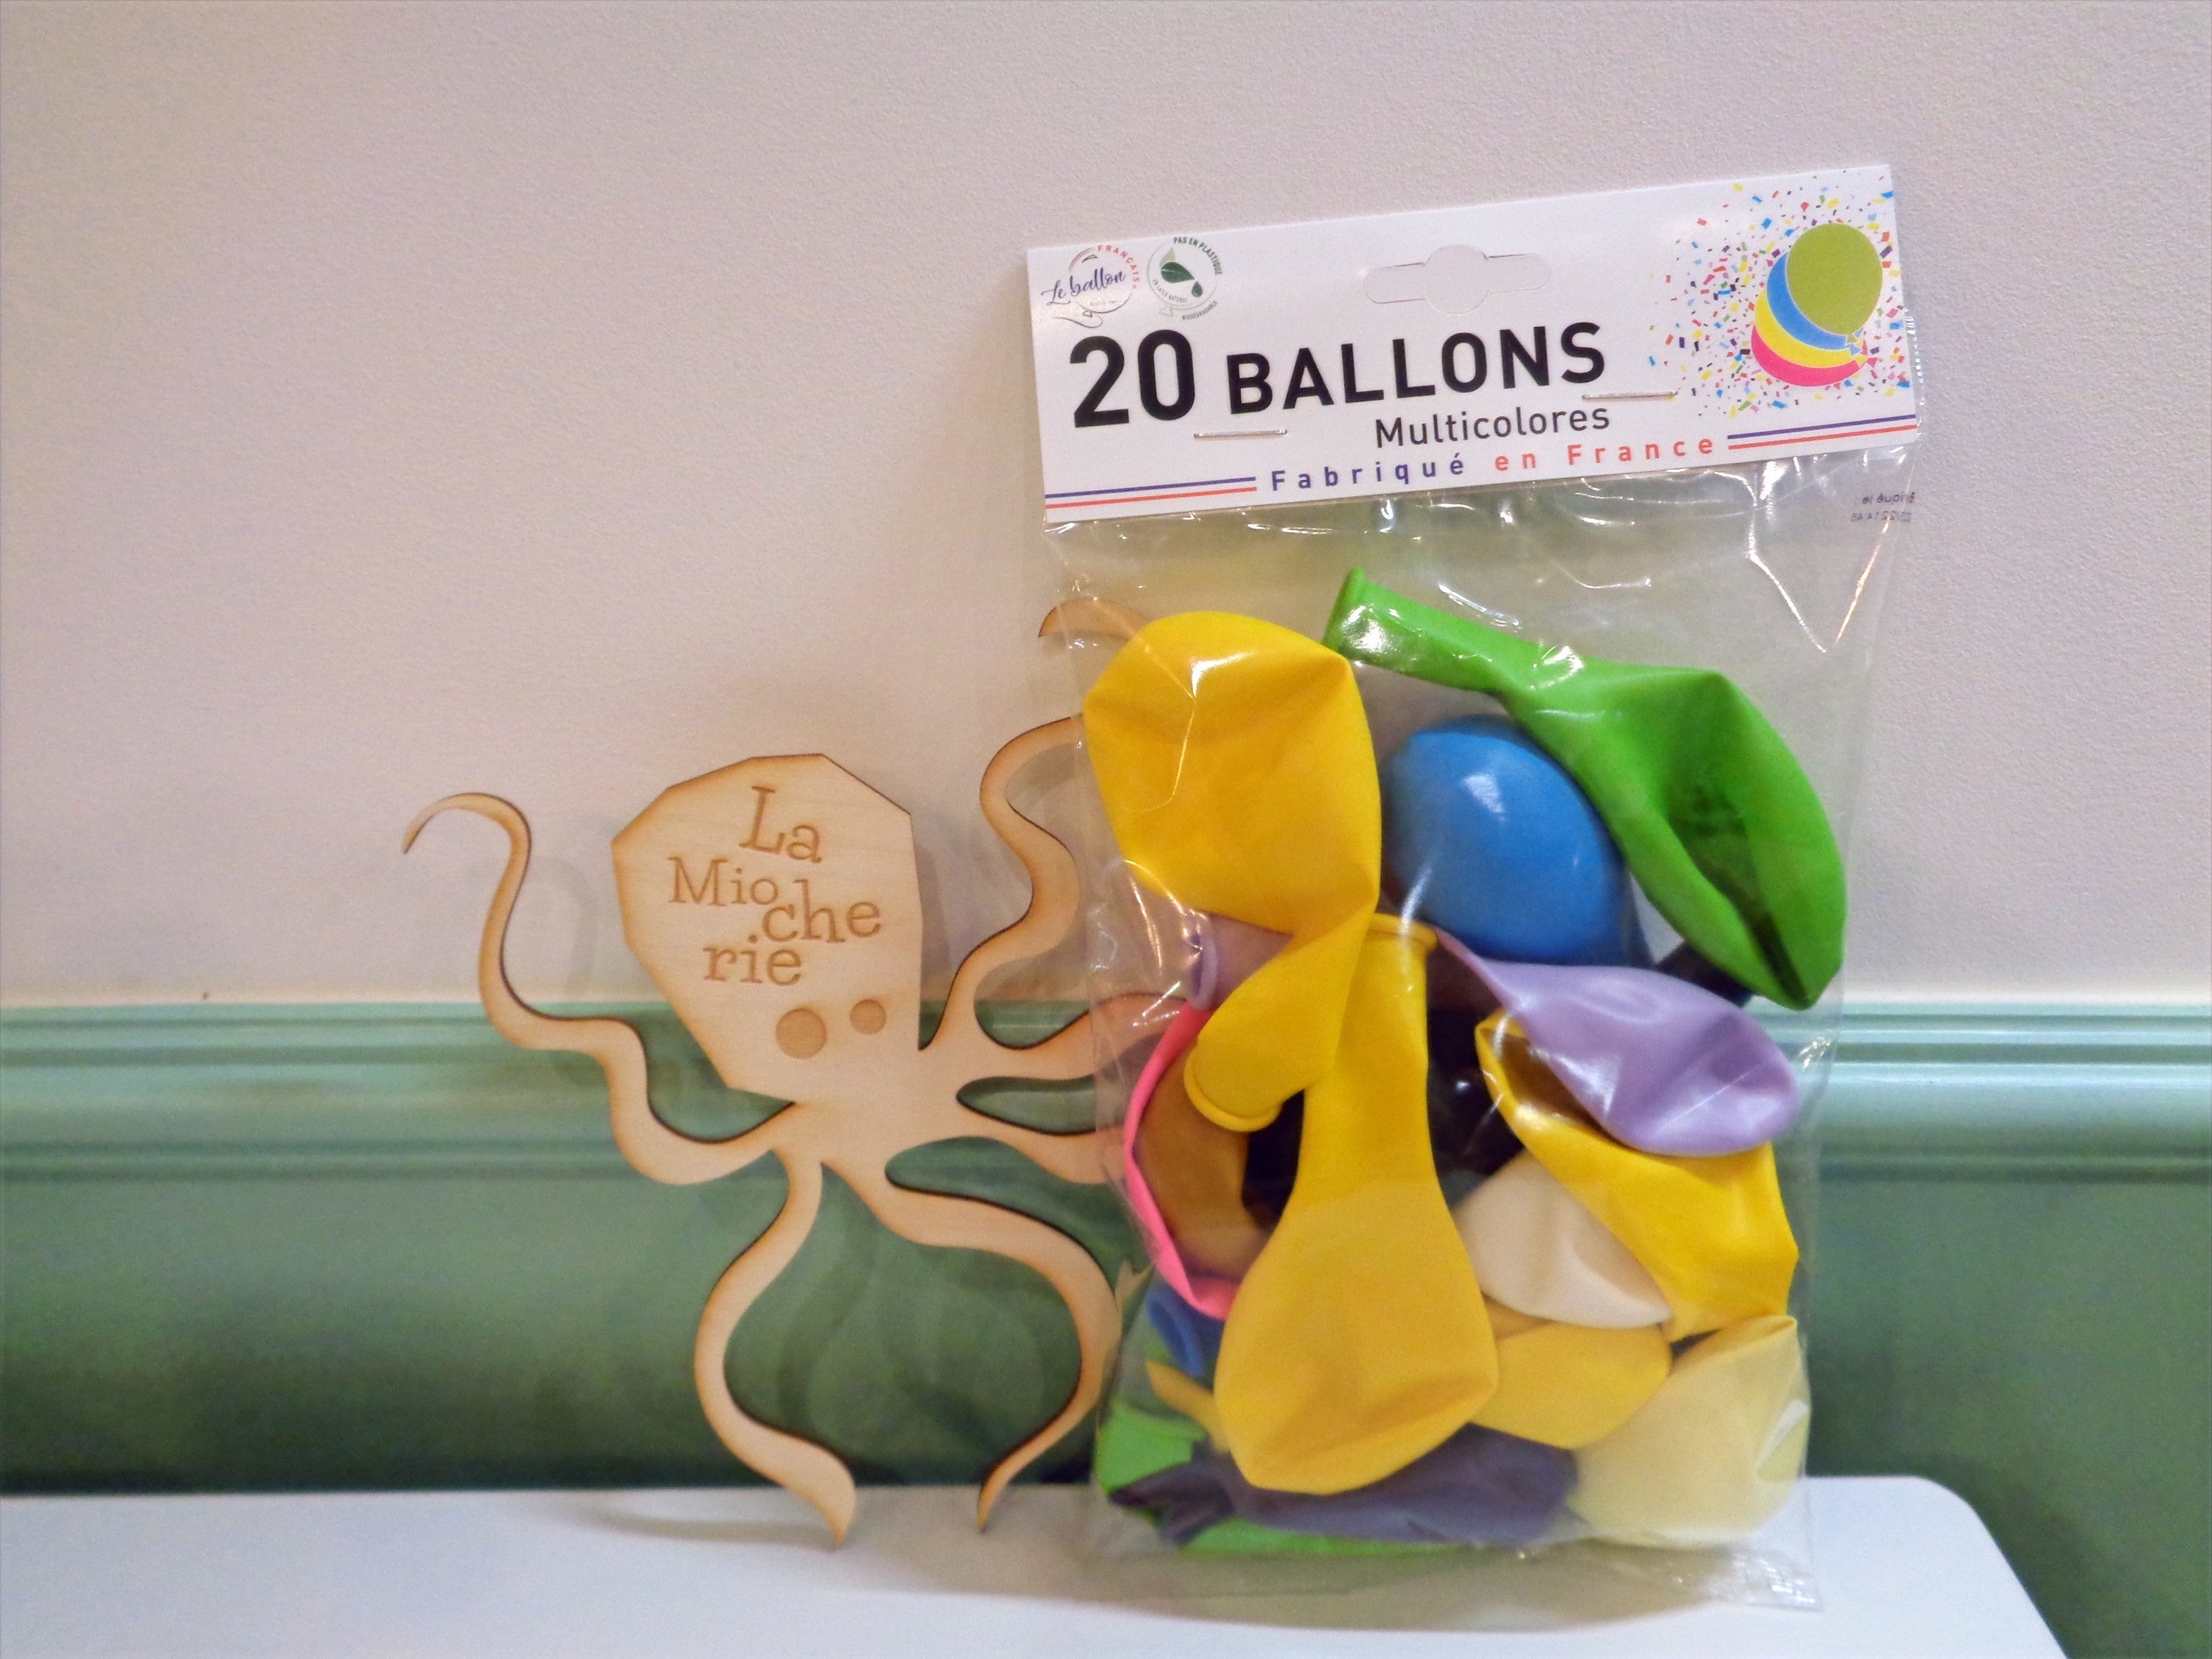 20 balloons - Made in France